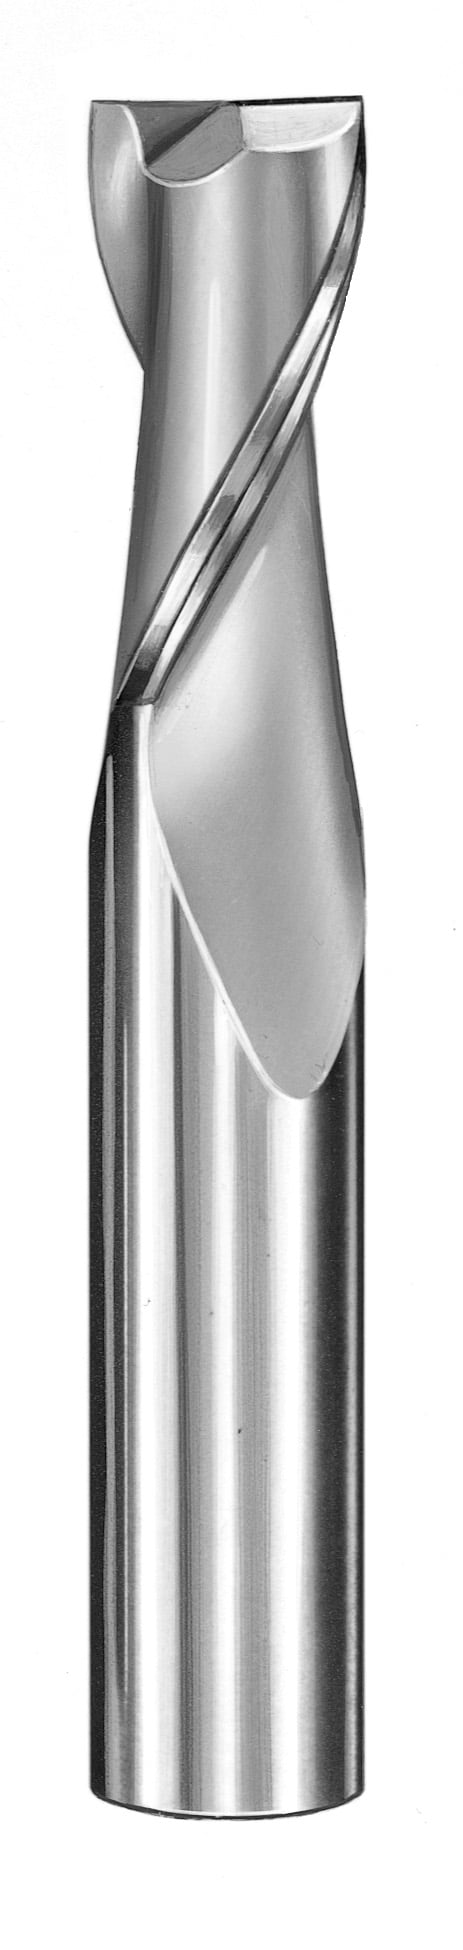 17/64" Dia, 2 Flute, Square End End Mill - 30333